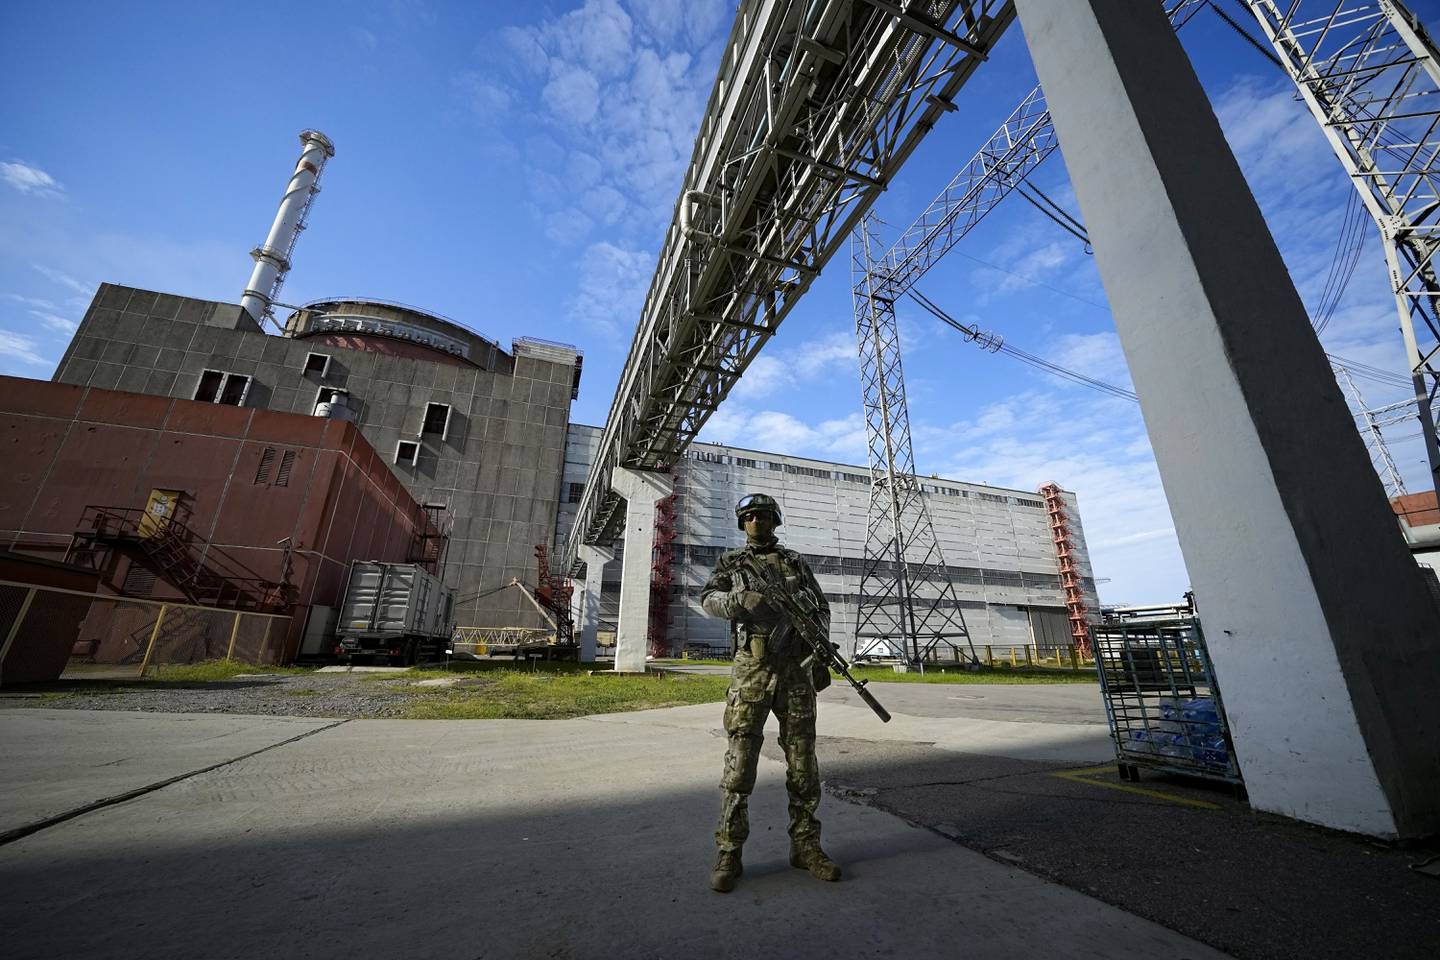 Ukraine accuses Russia of preparing a provocation at the Zaporizhia nuclear plant